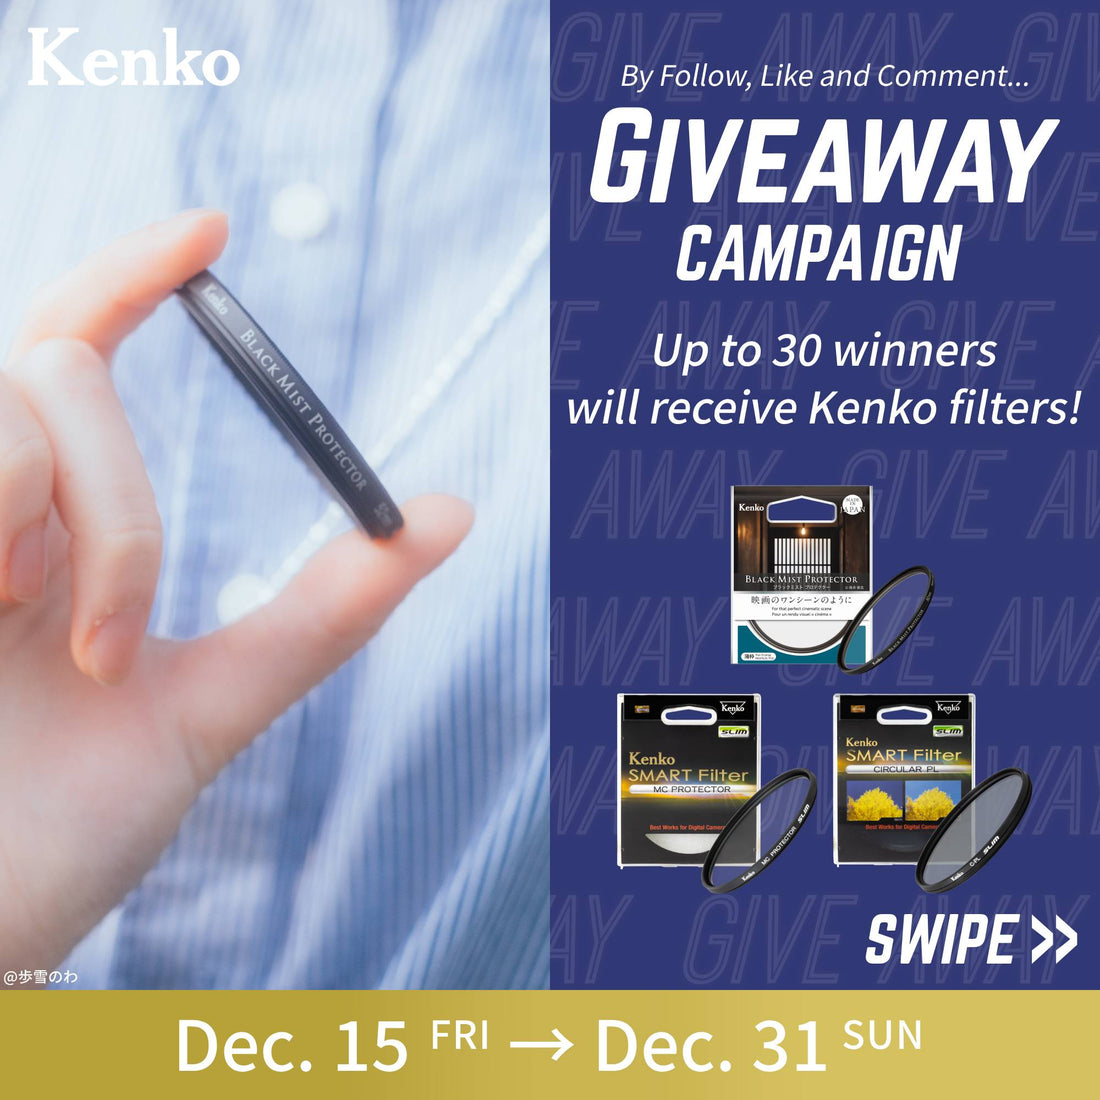 Kenko Filter Giveaway Campaign now on our official Instagram!